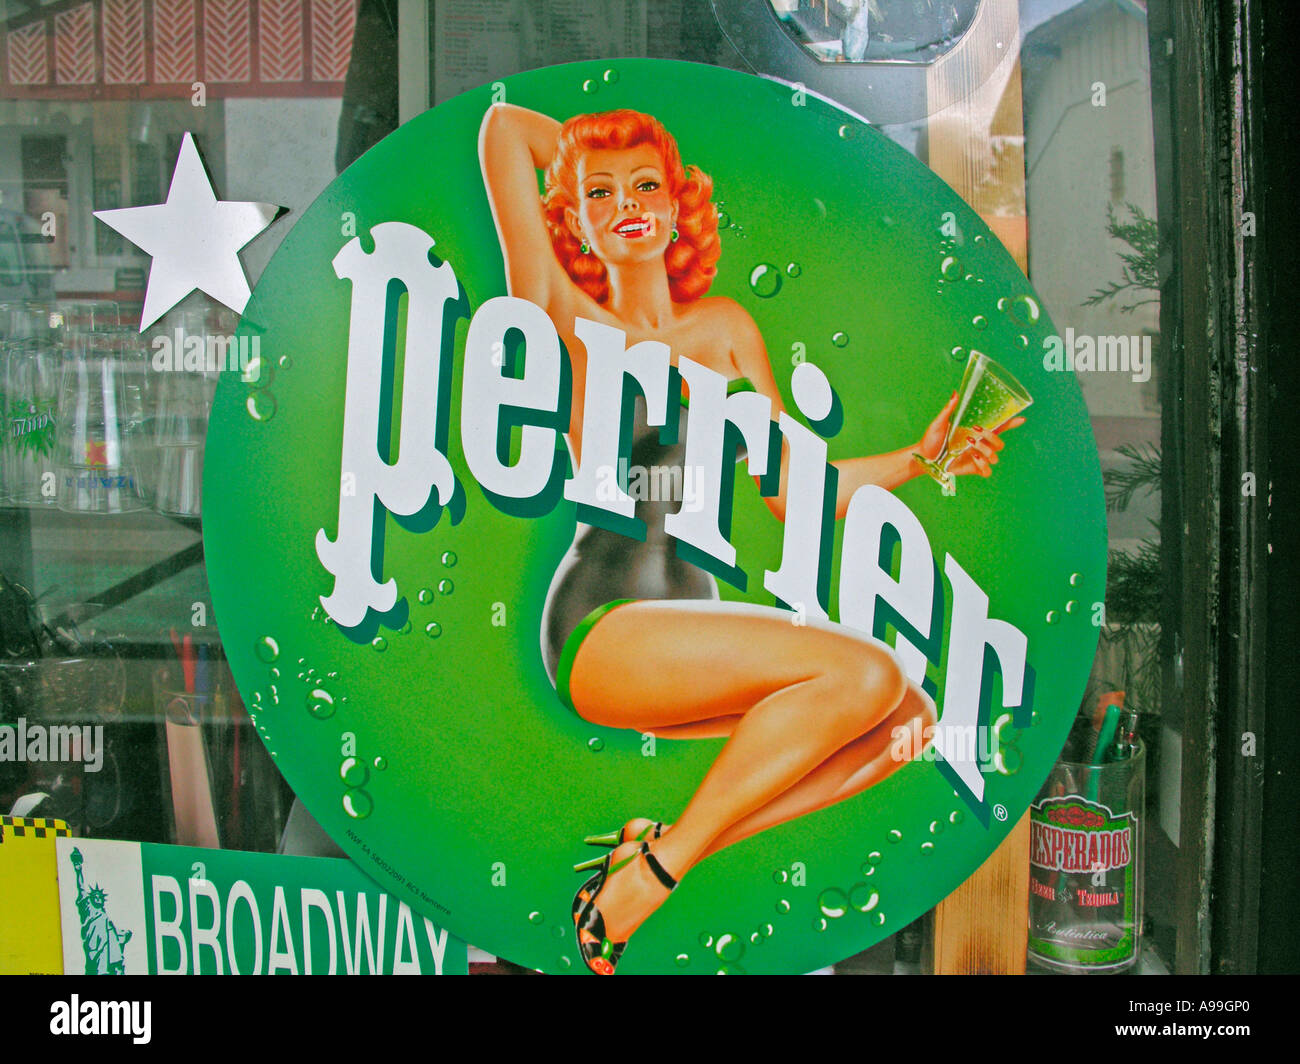 old advertising for the mineral water Perrier with a woman in bath dress on glassdoor of a bar Stock Photo